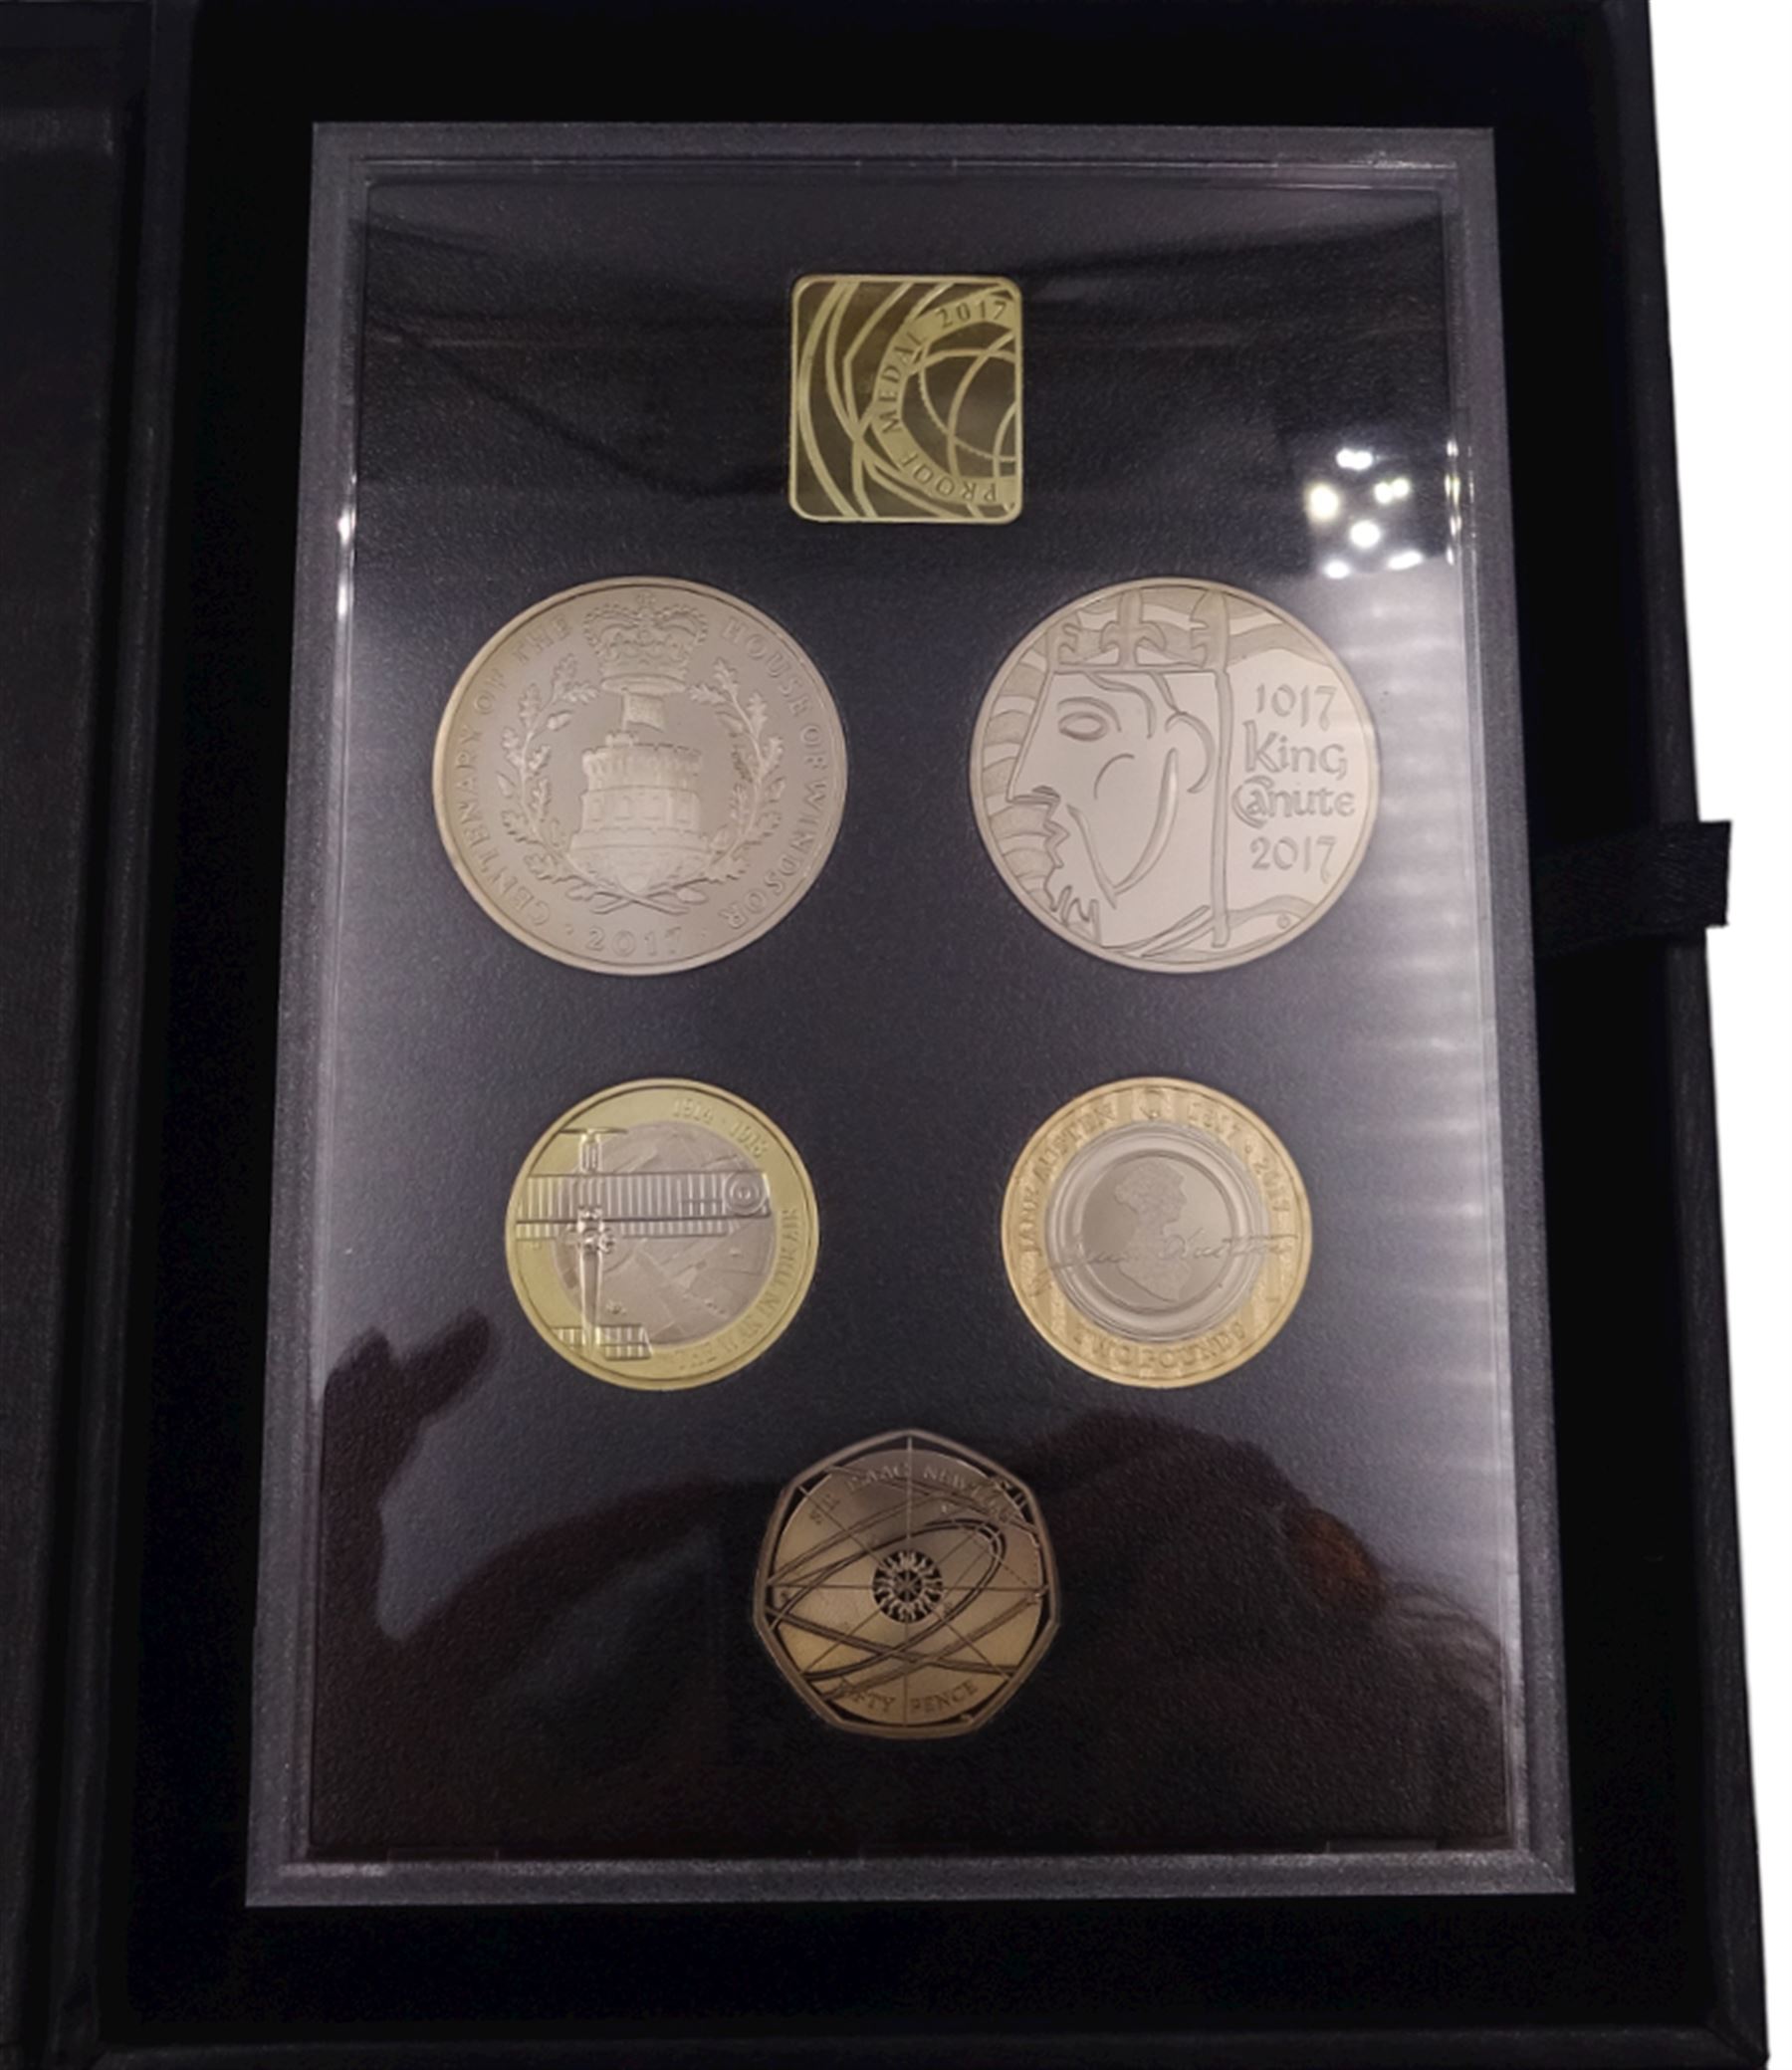 The Royal Mint United Kingdom 2017 proof coin set - Image 2 of 2